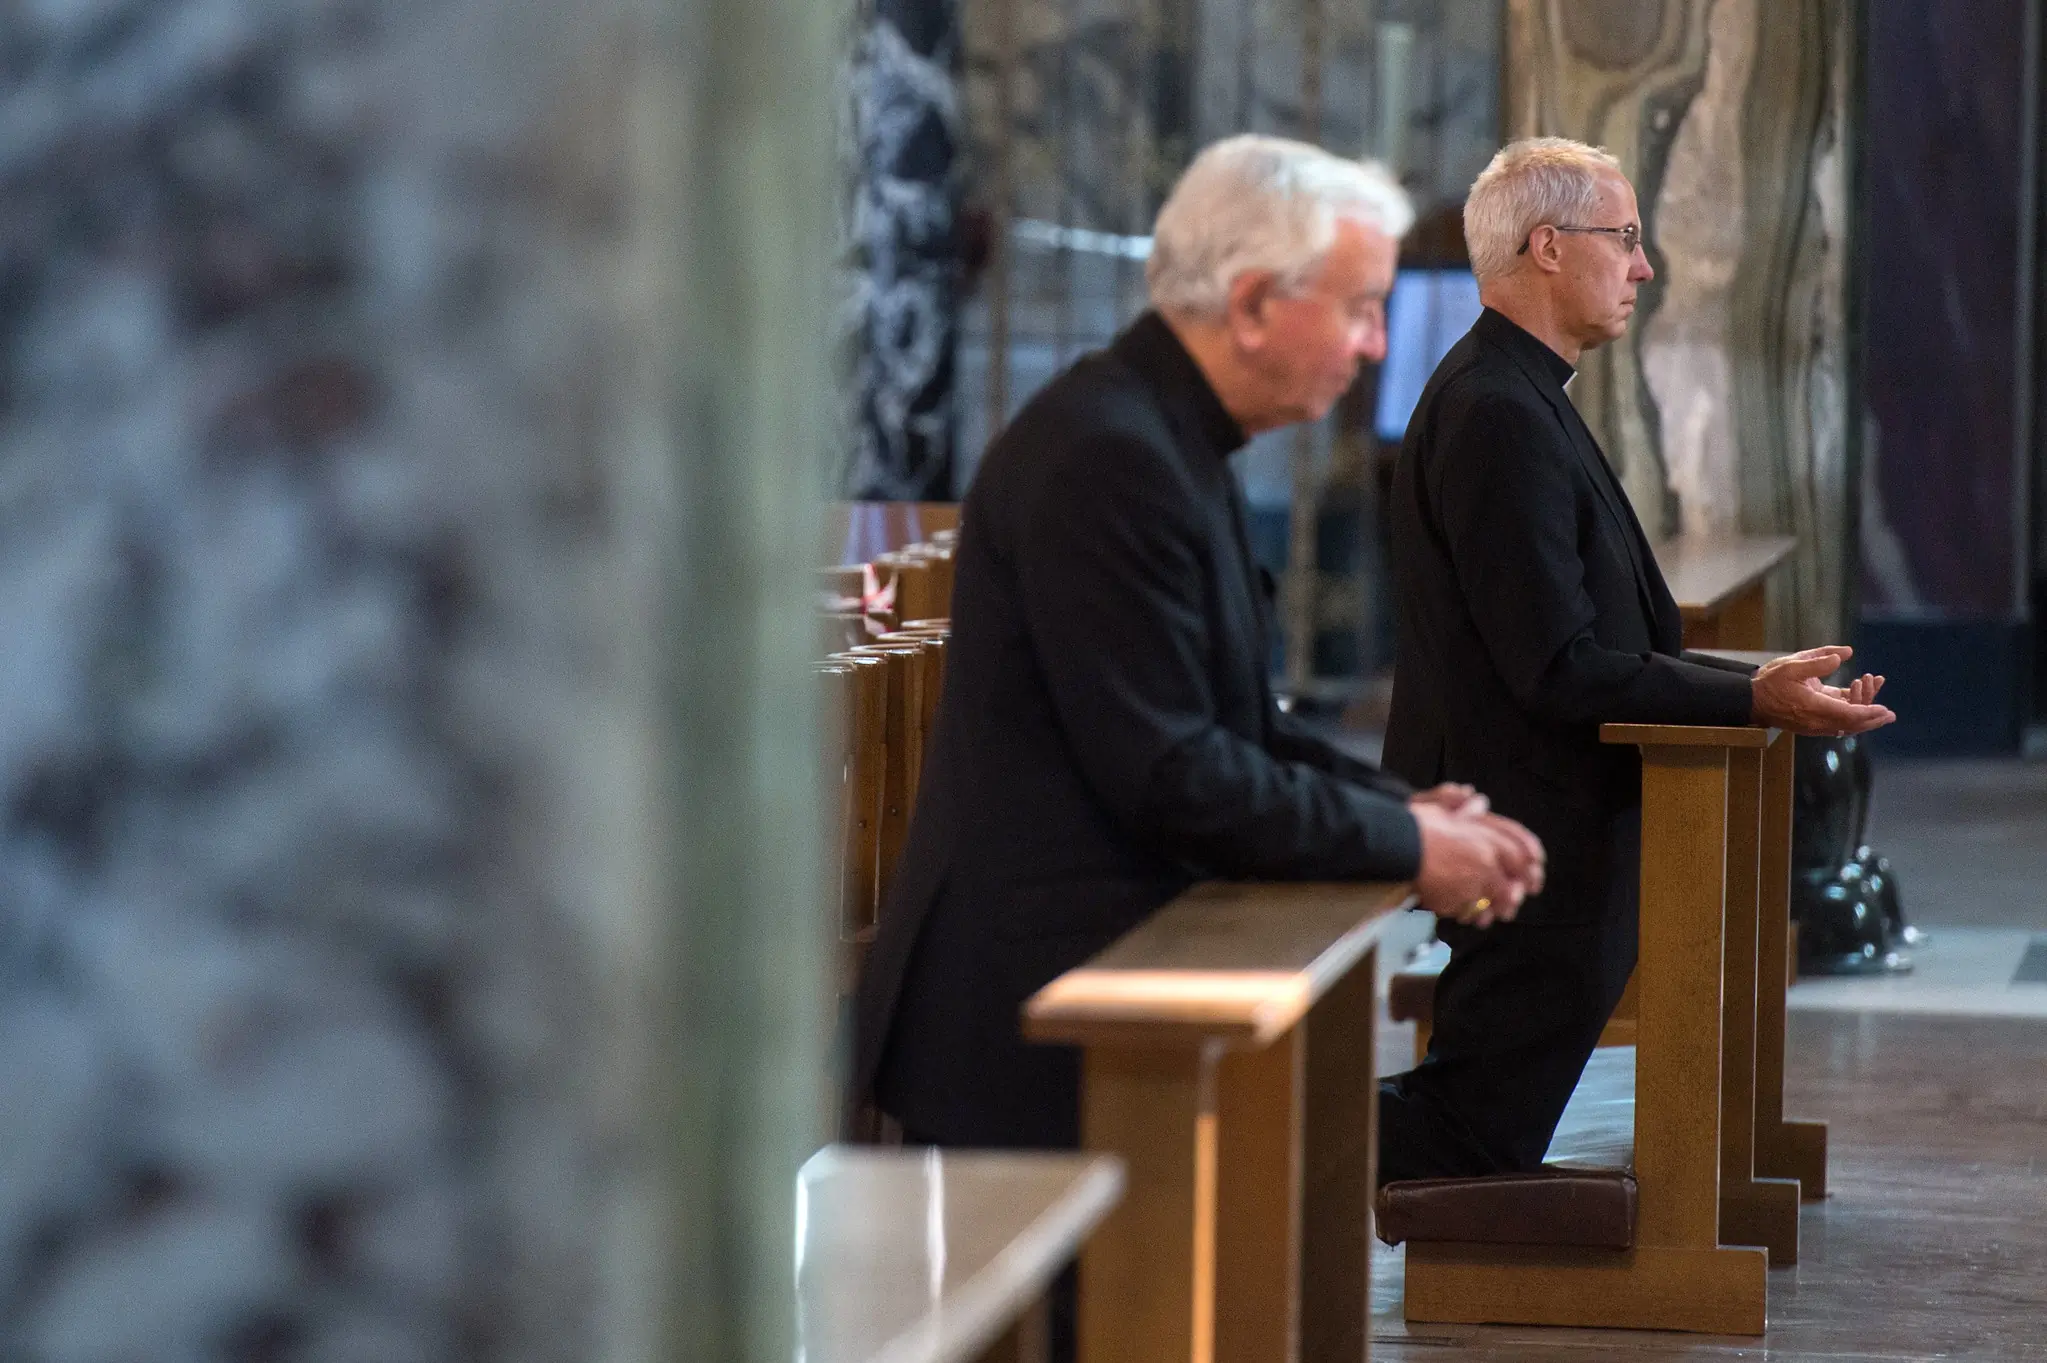 Cardinal Vincent Nichols and Archbishop Justin Welby praying at Westminster Cathedral on the first day of re-opening after COVID-19 shutdown